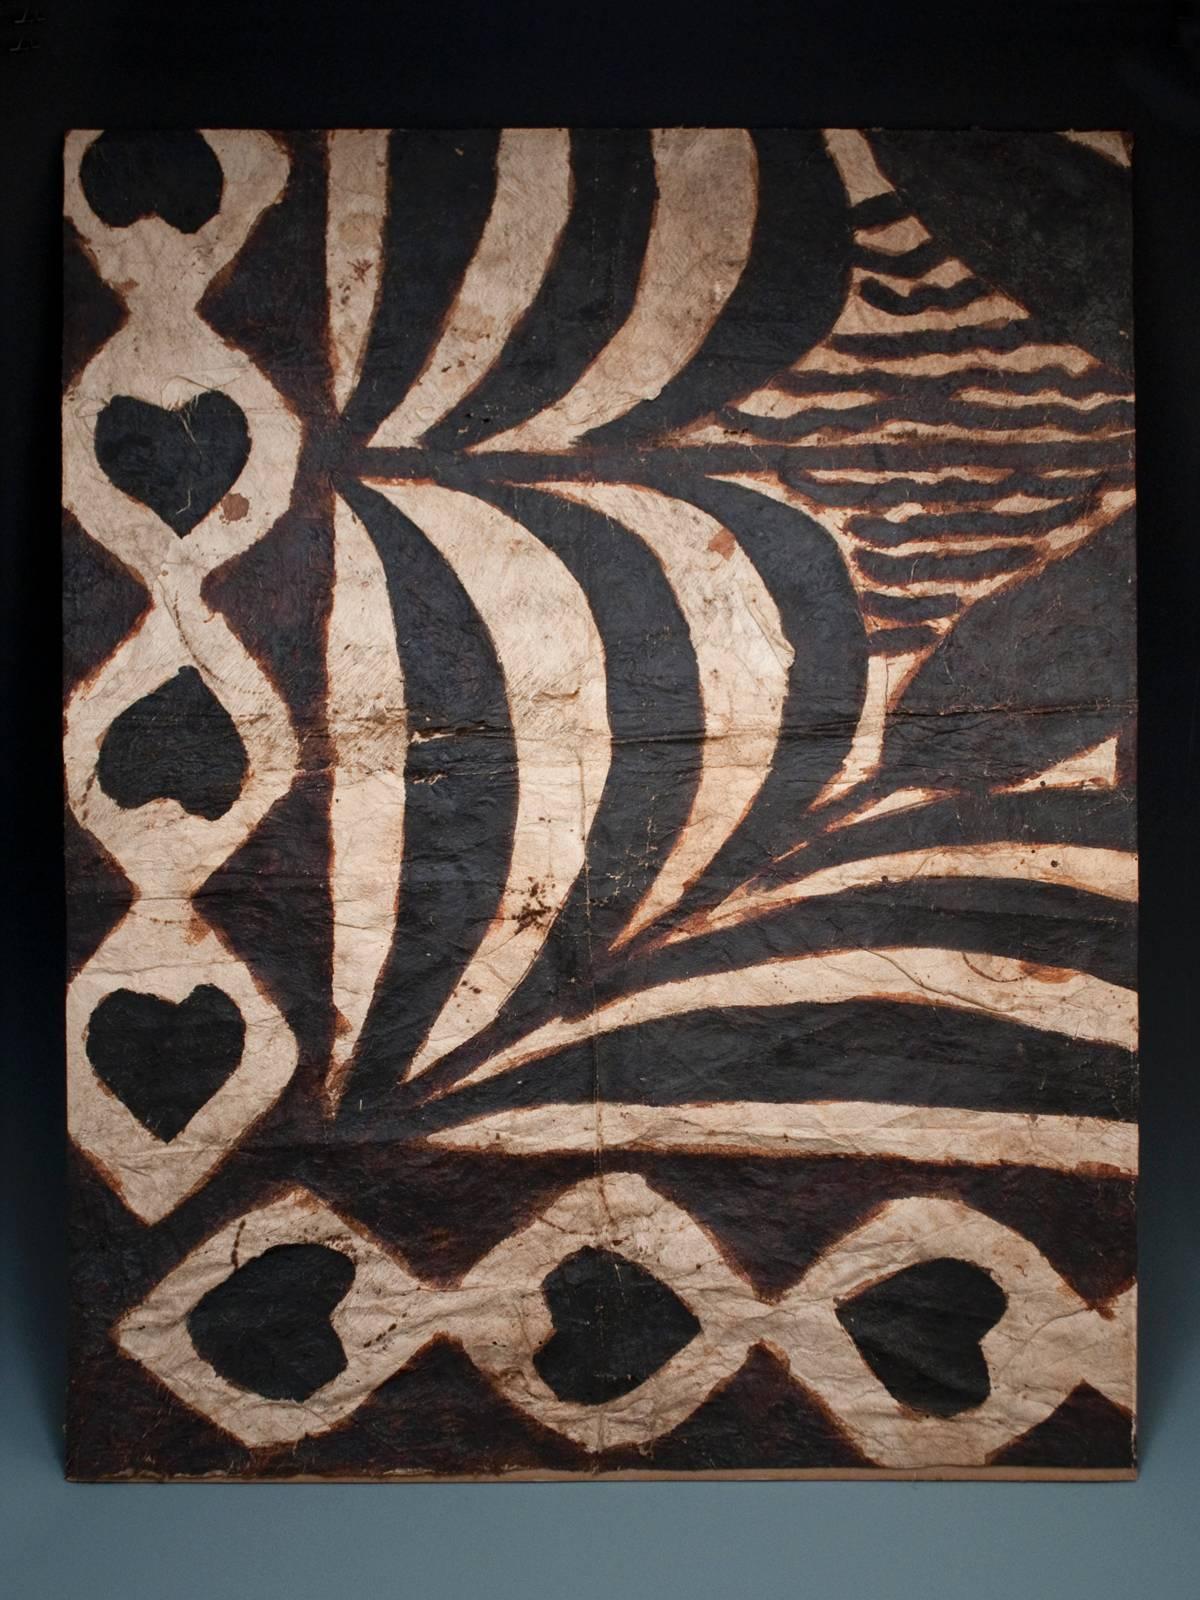 Offered by Zena Kruzick.
Early 20th century abstract tapa cloth fragment from western Samoa.
Bark cloth, 'o'a sap and lama nut glaze.

This portion of a larger tapa cloth was collected, circa 1910-1920 by Rear Admiral Cary Travers Grayson